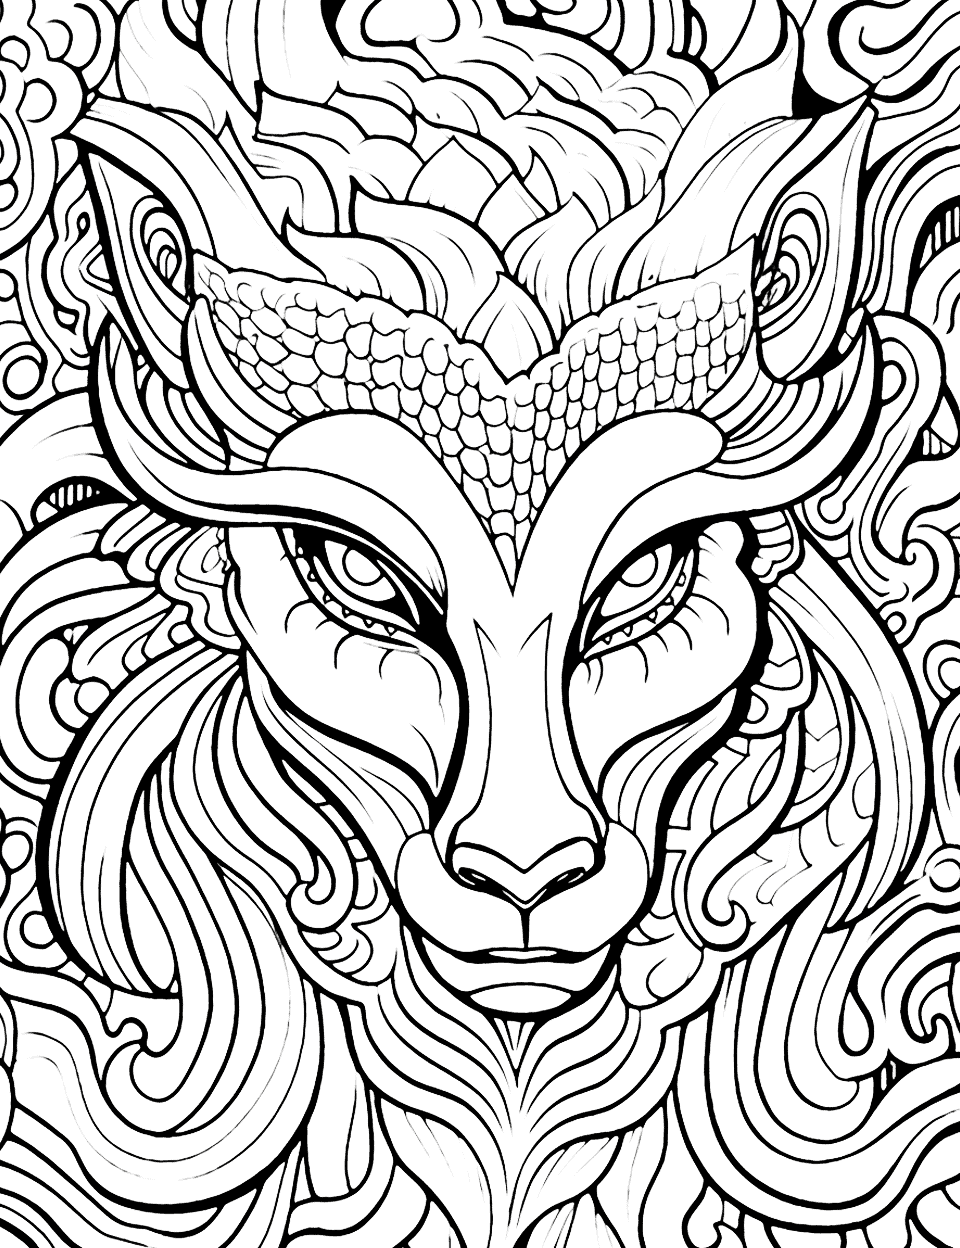 Abstract Mythical Creature Adult Coloring Page - An abstract interpretation of a mythical creature.